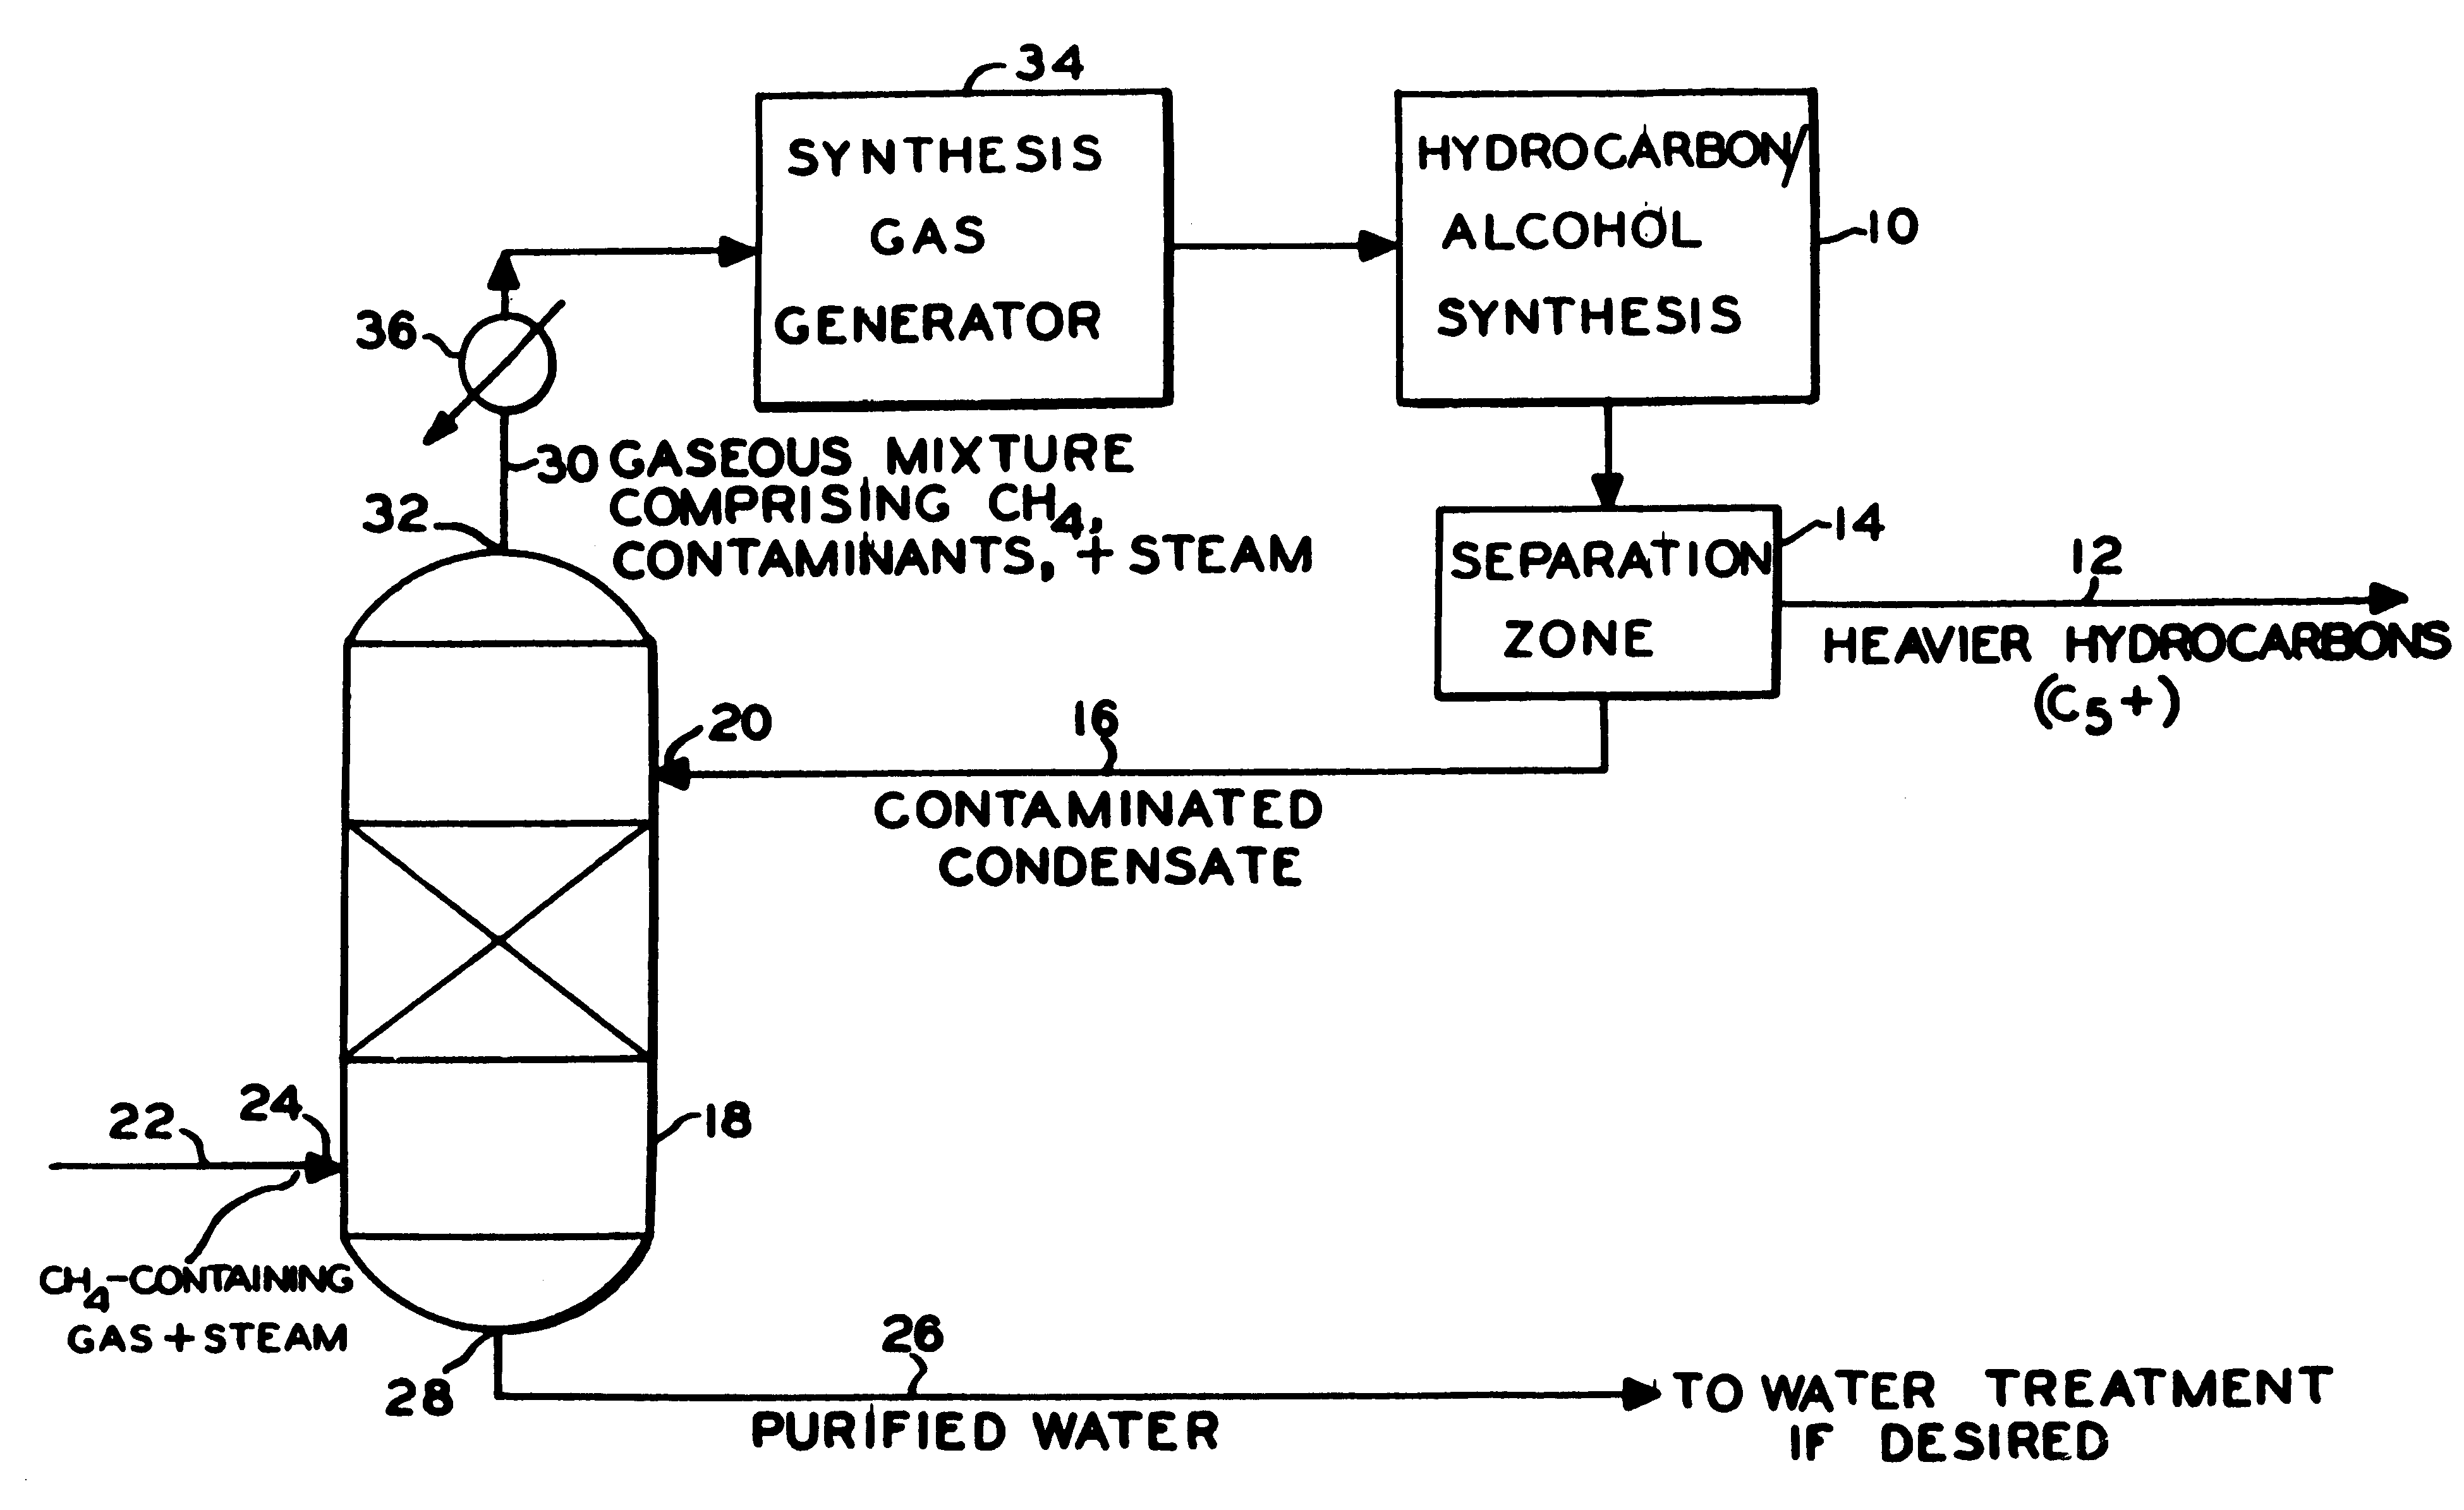 Process for recycling and purifying condensate from a hydrocarbon or alcohol synthesis process